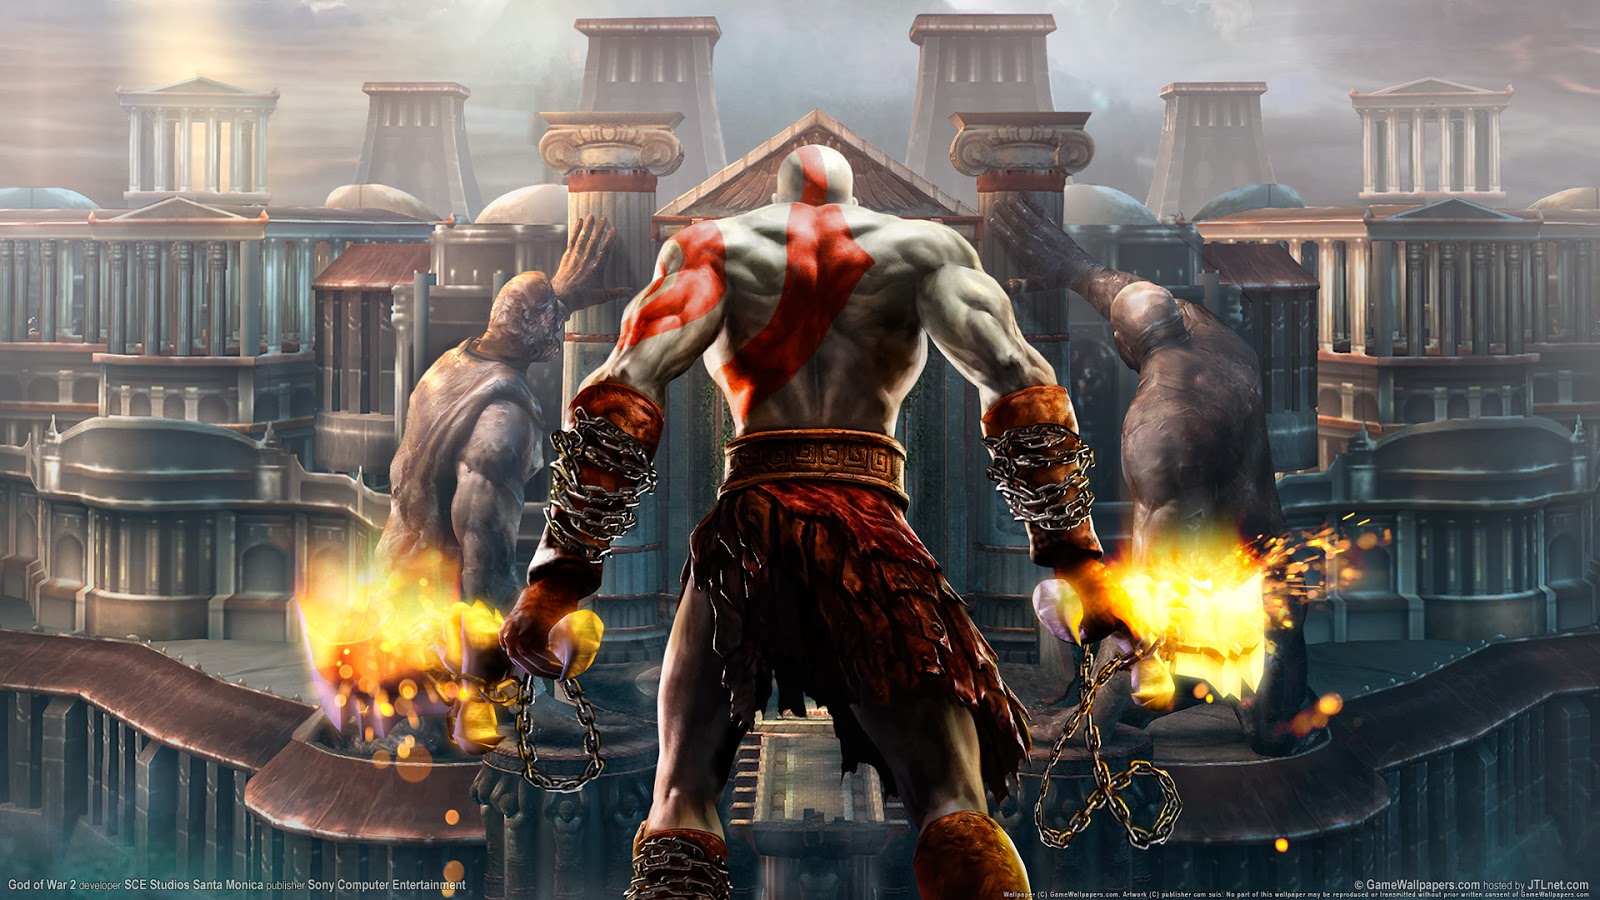 Kratos is the kind of guy who doesn’t take “No! Please! I don’t want to die!” for an answer. That’s what we like about him.